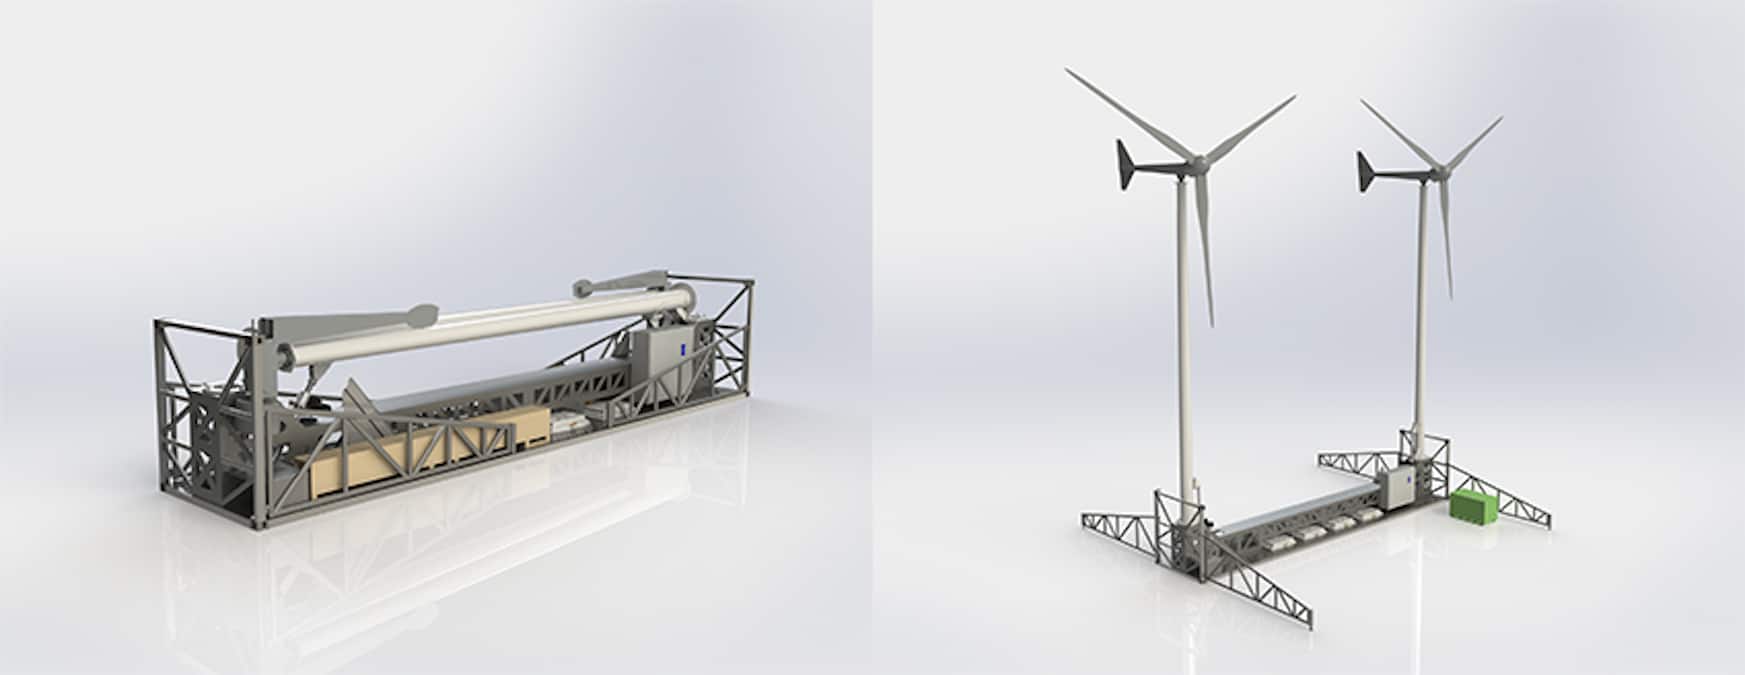 An illustration of a rapidly deployable wind energy system, shown on the left in its shipping configuration and on the right as it would be deployed on location